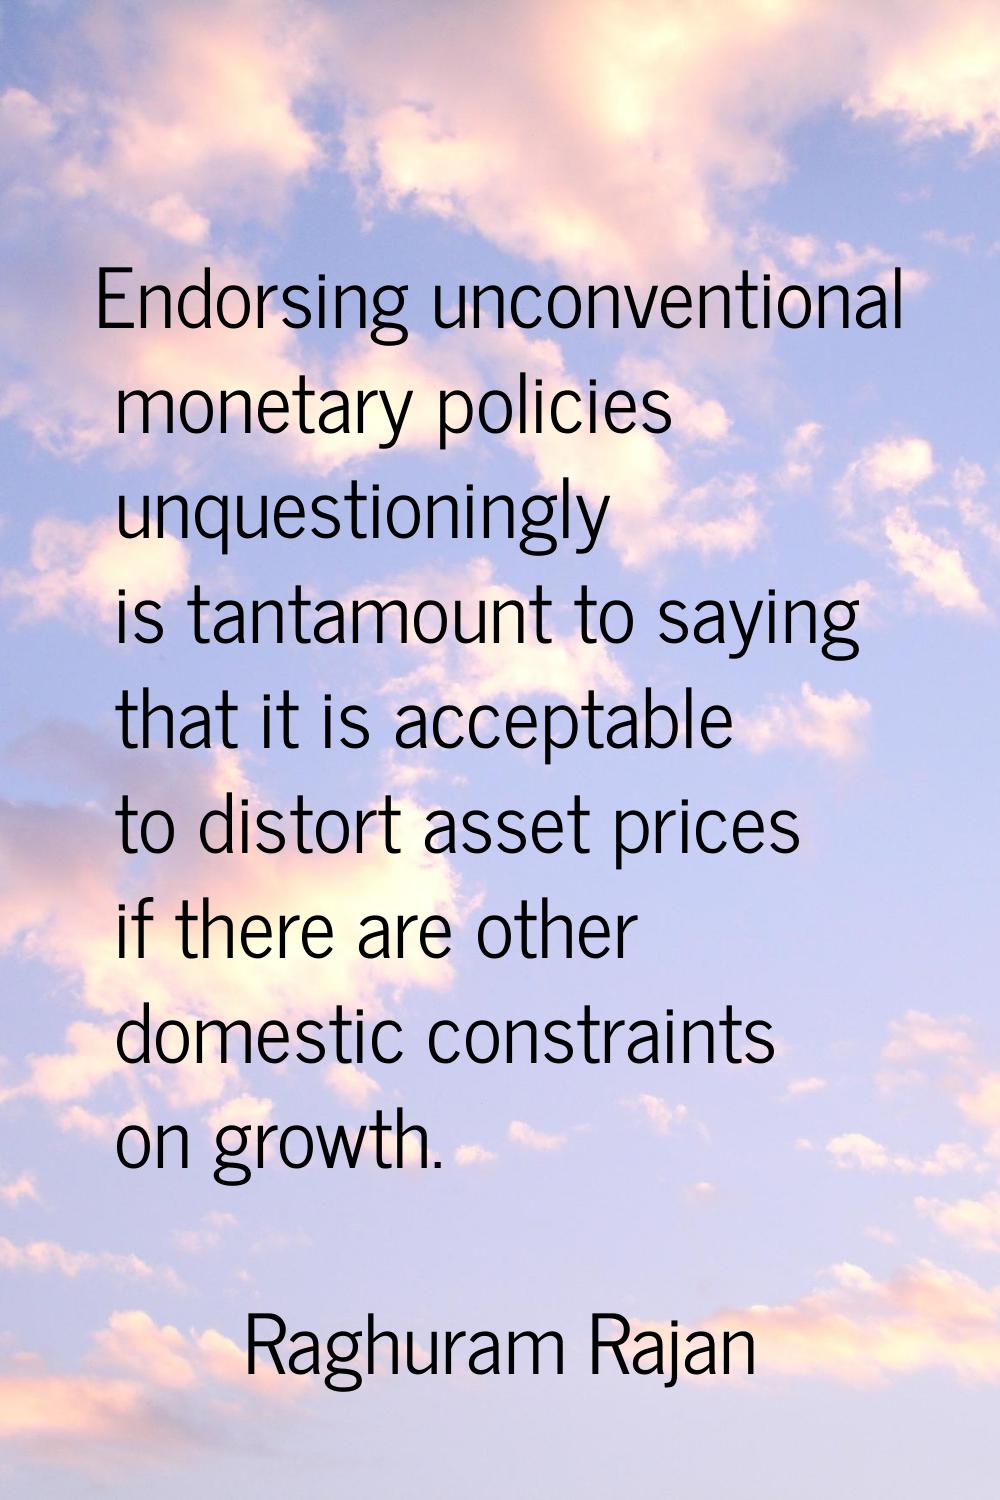 Endorsing unconventional monetary policies unquestioningly is tantamount to saying that it is accep